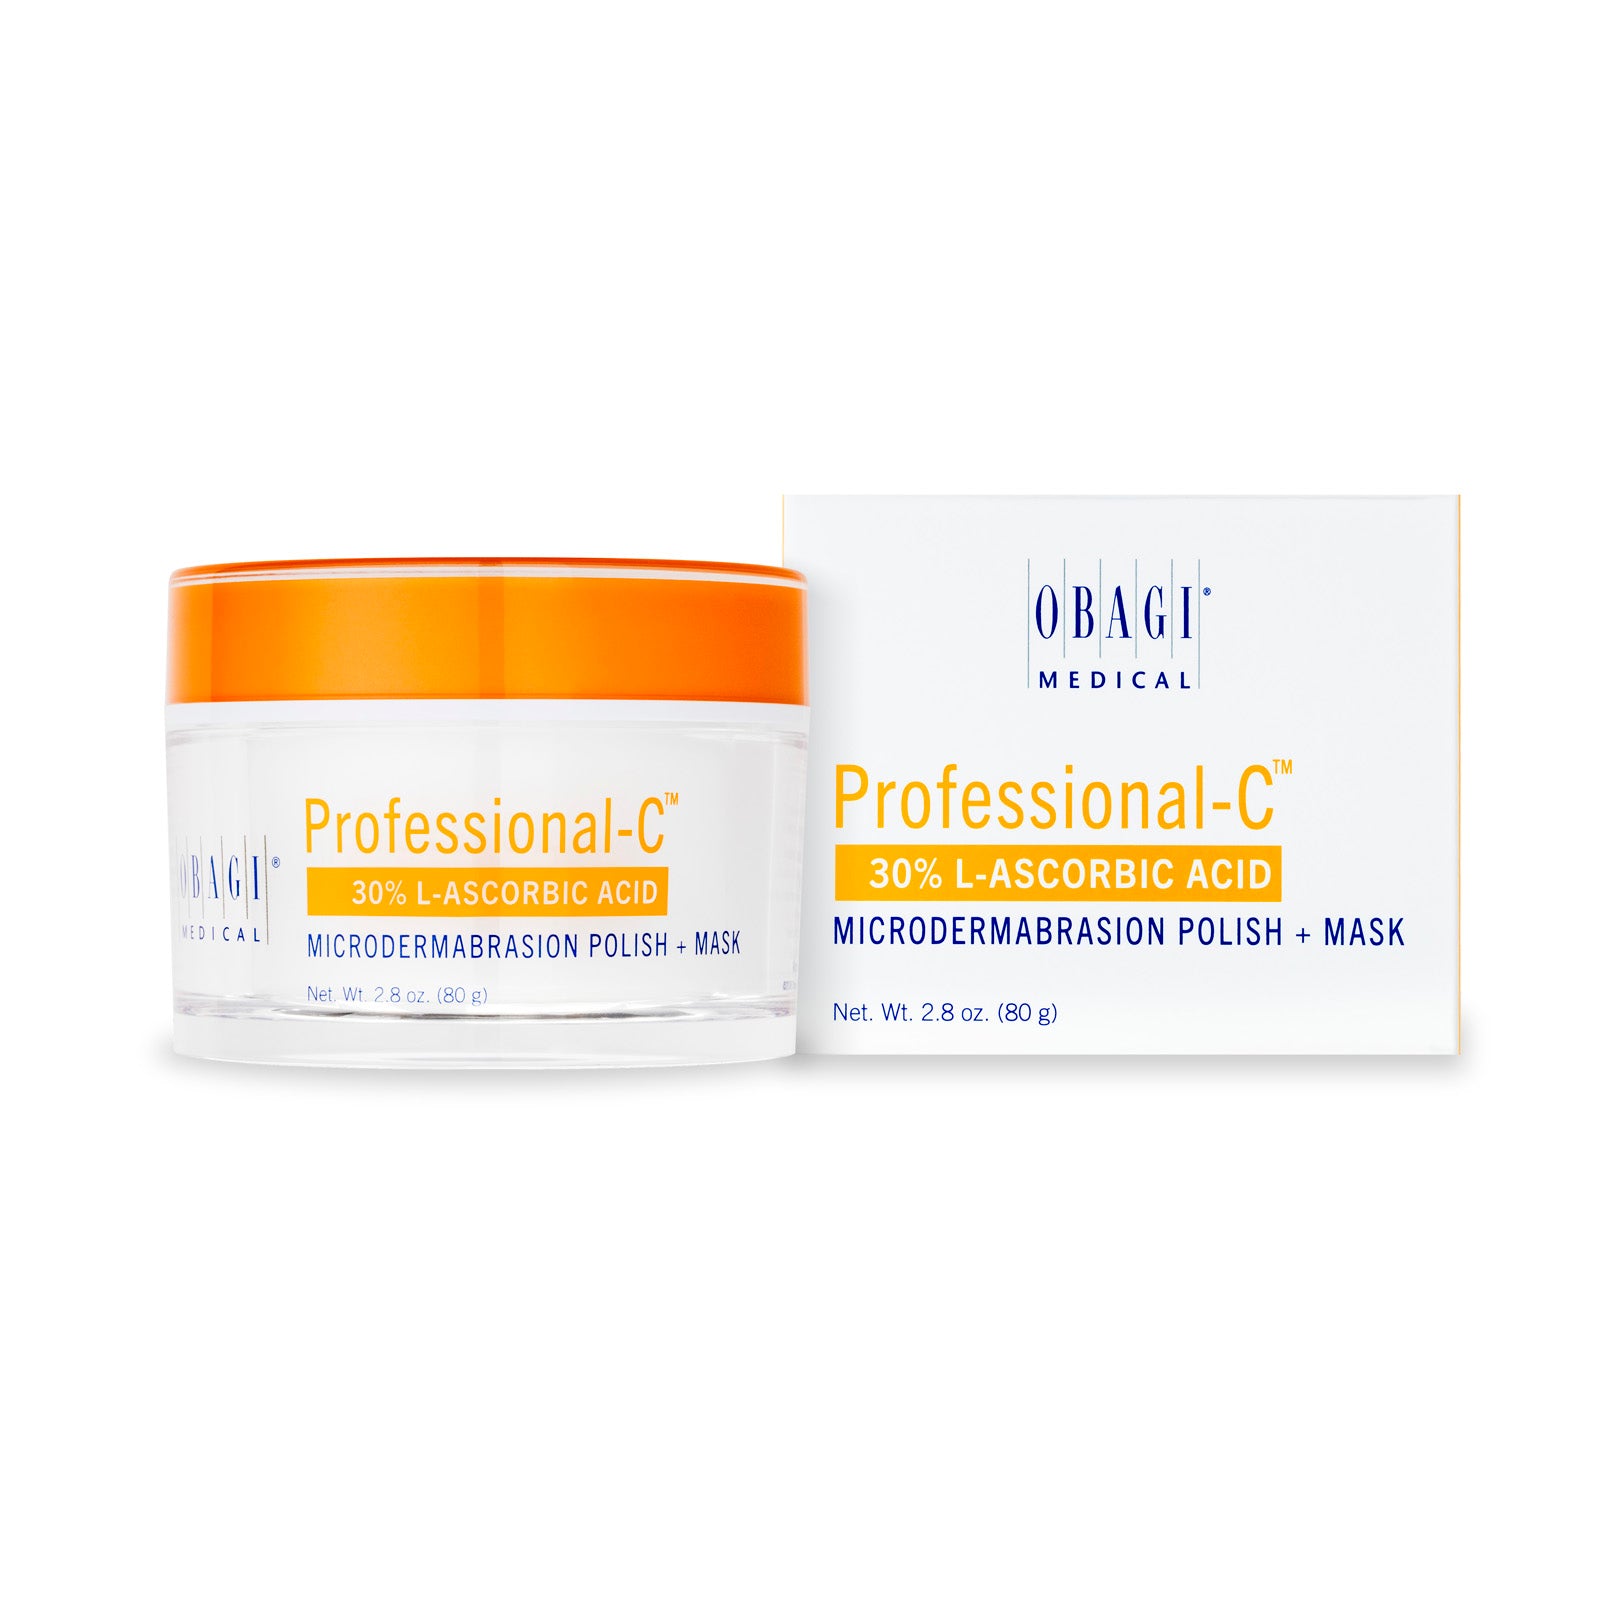 Professional-C Microdermabrasion Polish + Mask, Dual-action vitamin C face mask - Beauty By Vianna